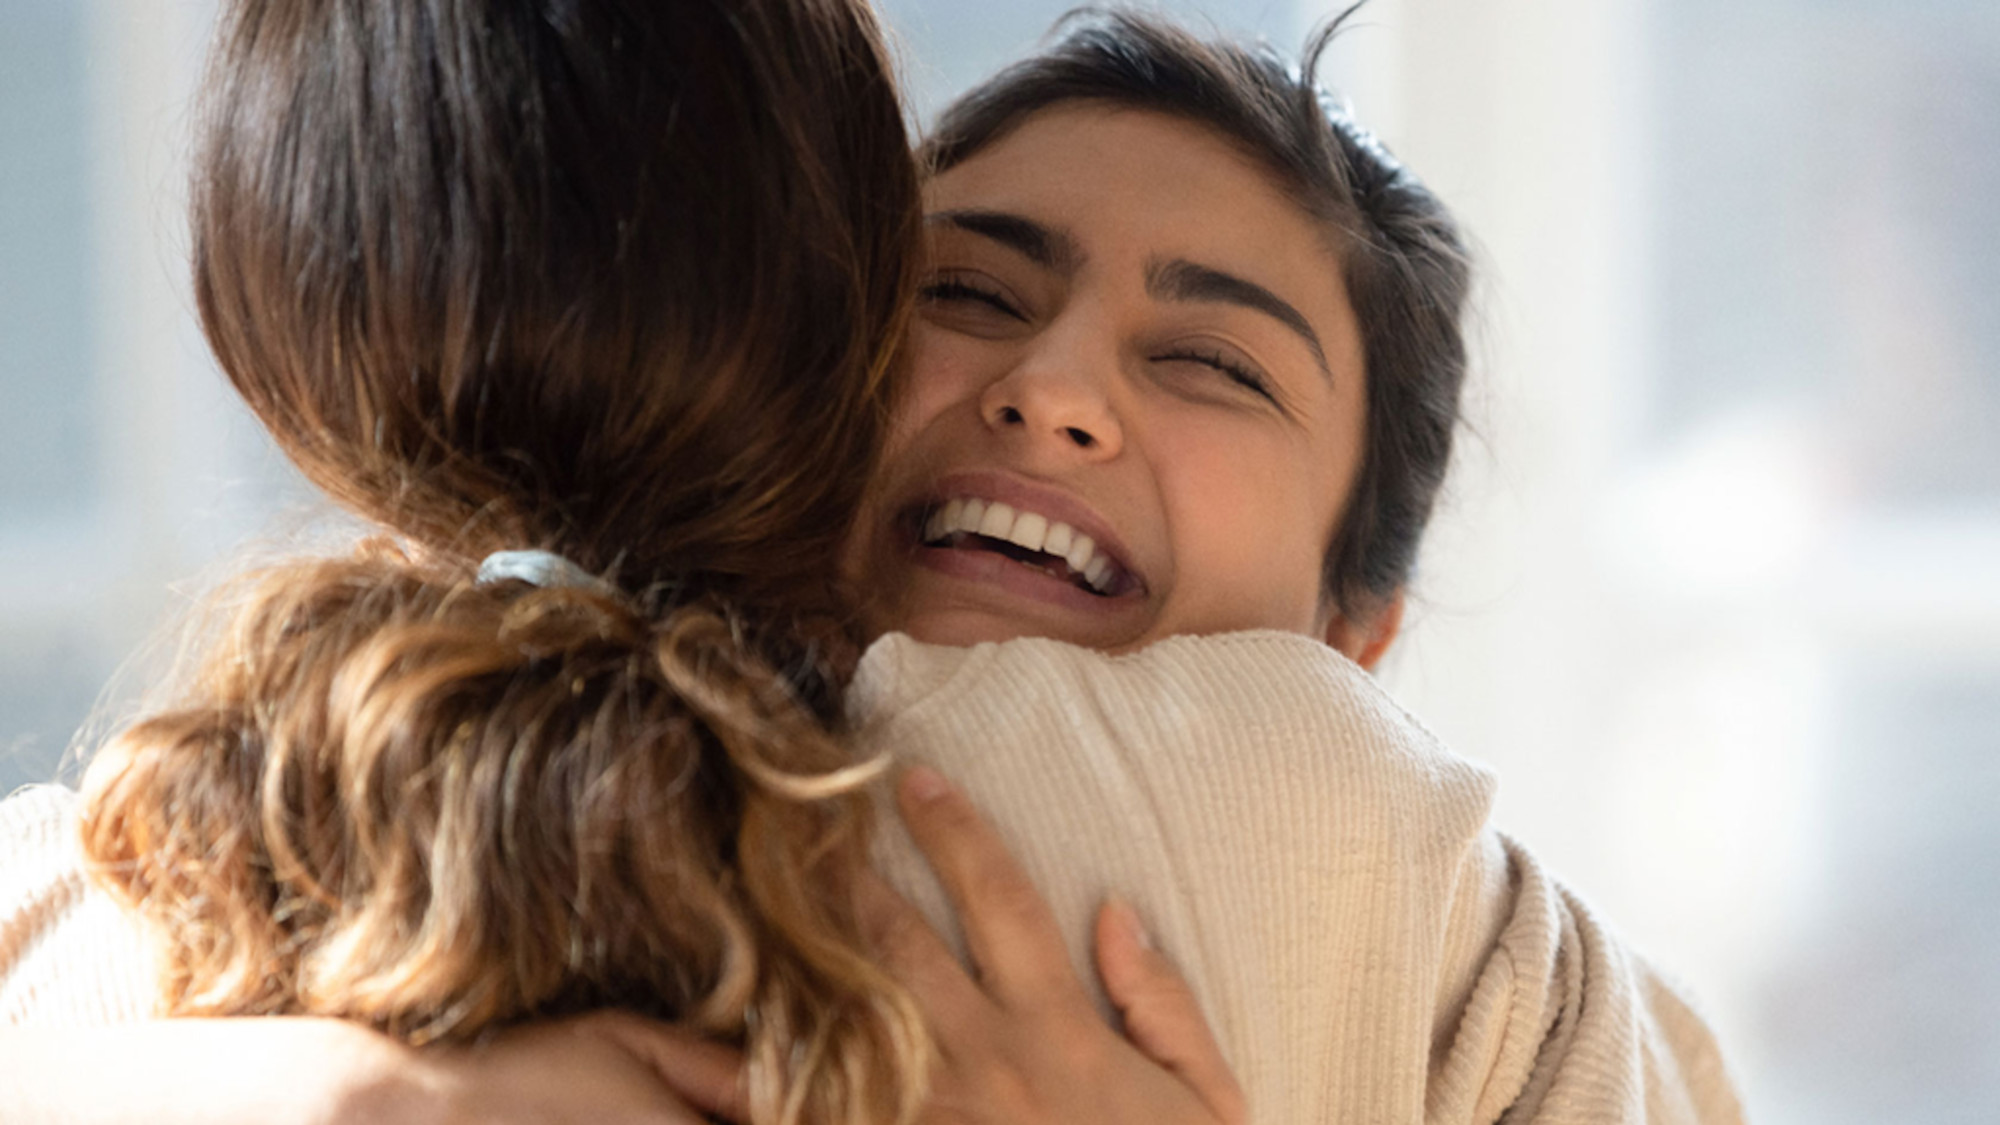 Two young women embrace each other affectionately